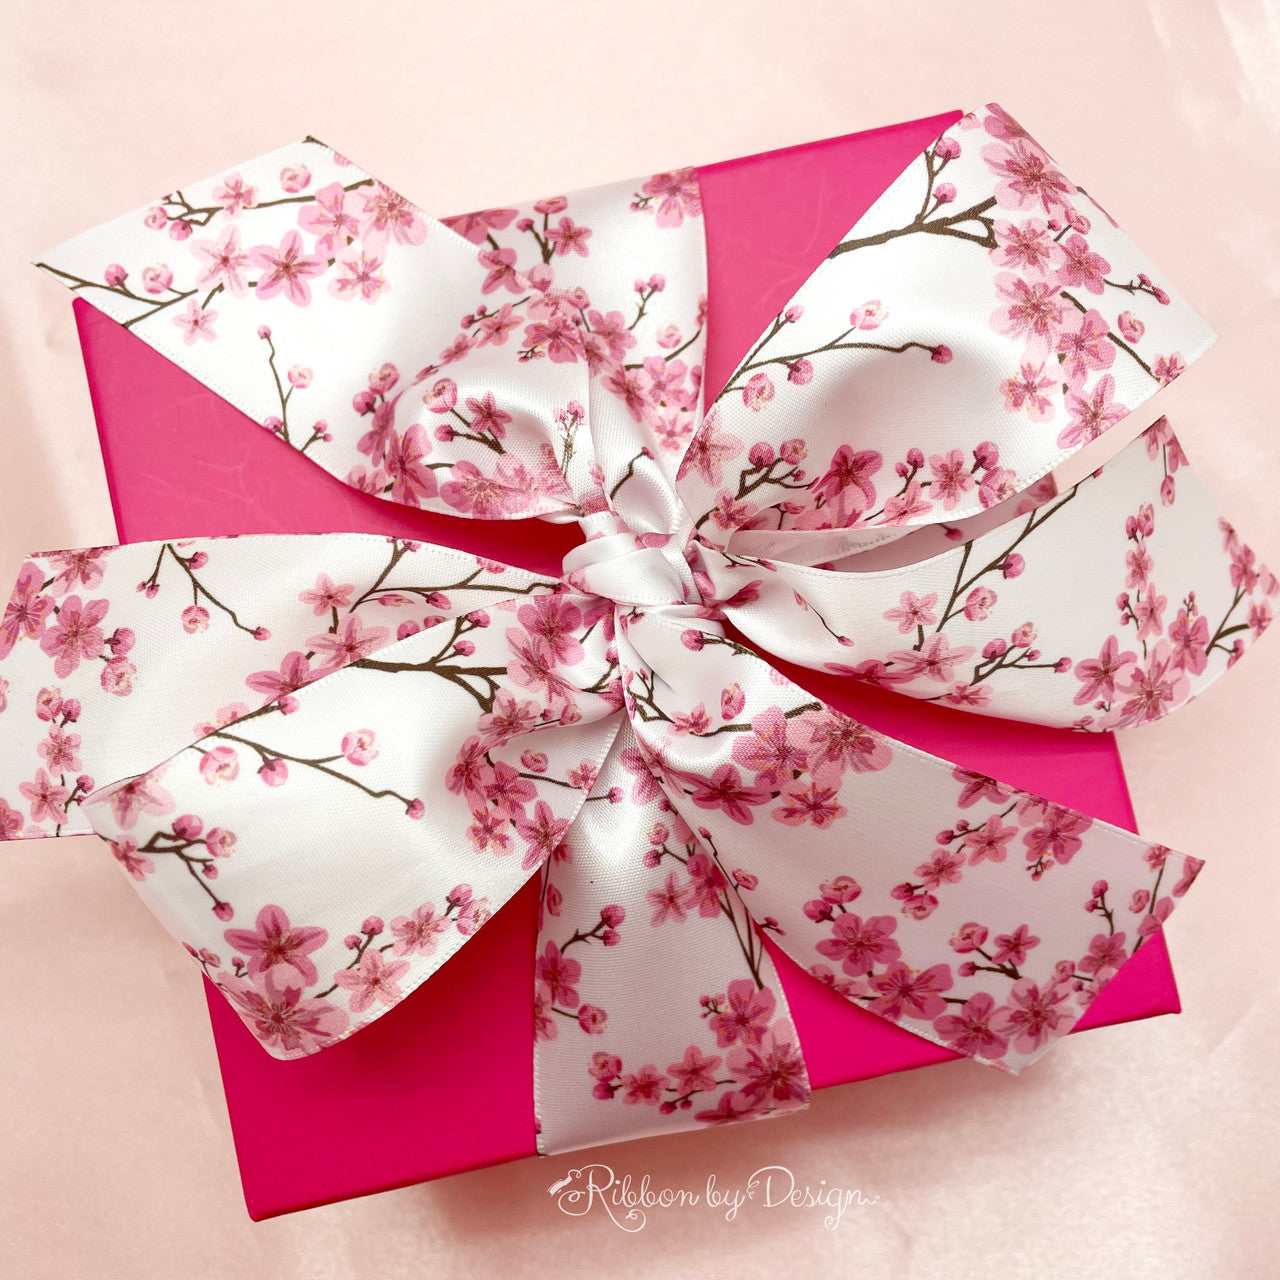 Our luxurious satin  ribbon makes  the perfect bow for gift wrap!